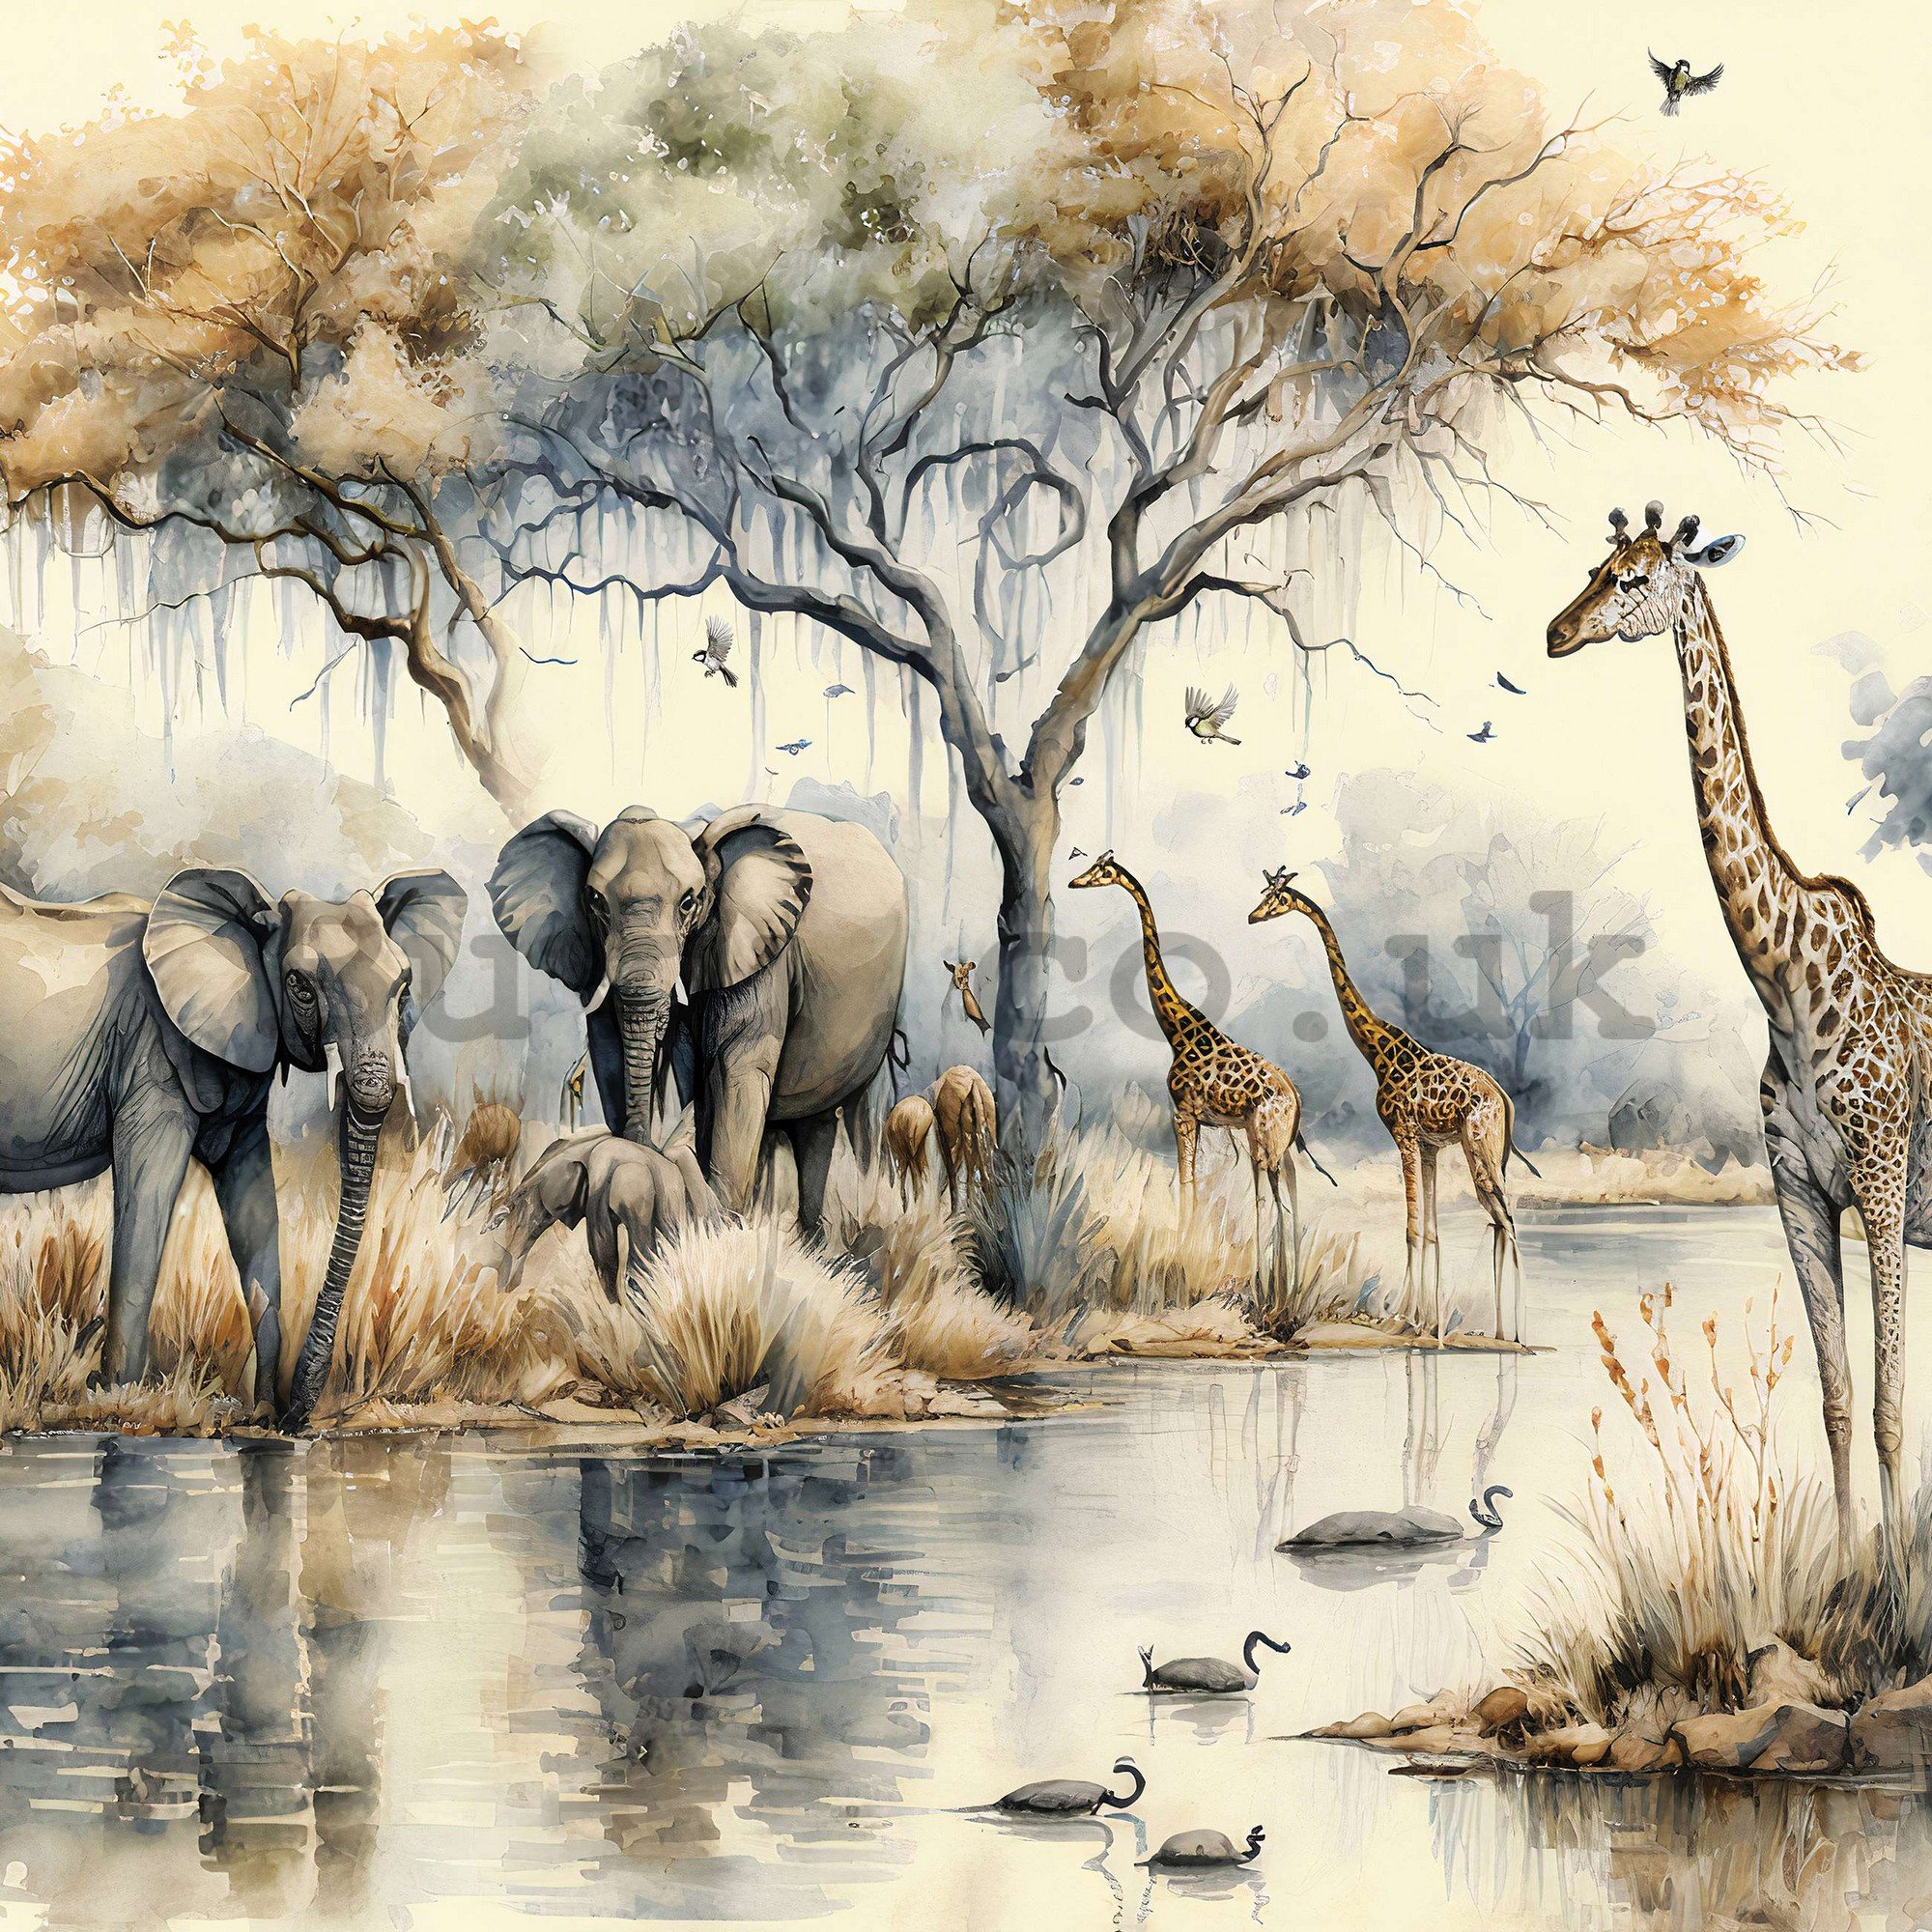 Wall mural vlies: Wild animals at the watering hole - 416x254 cm